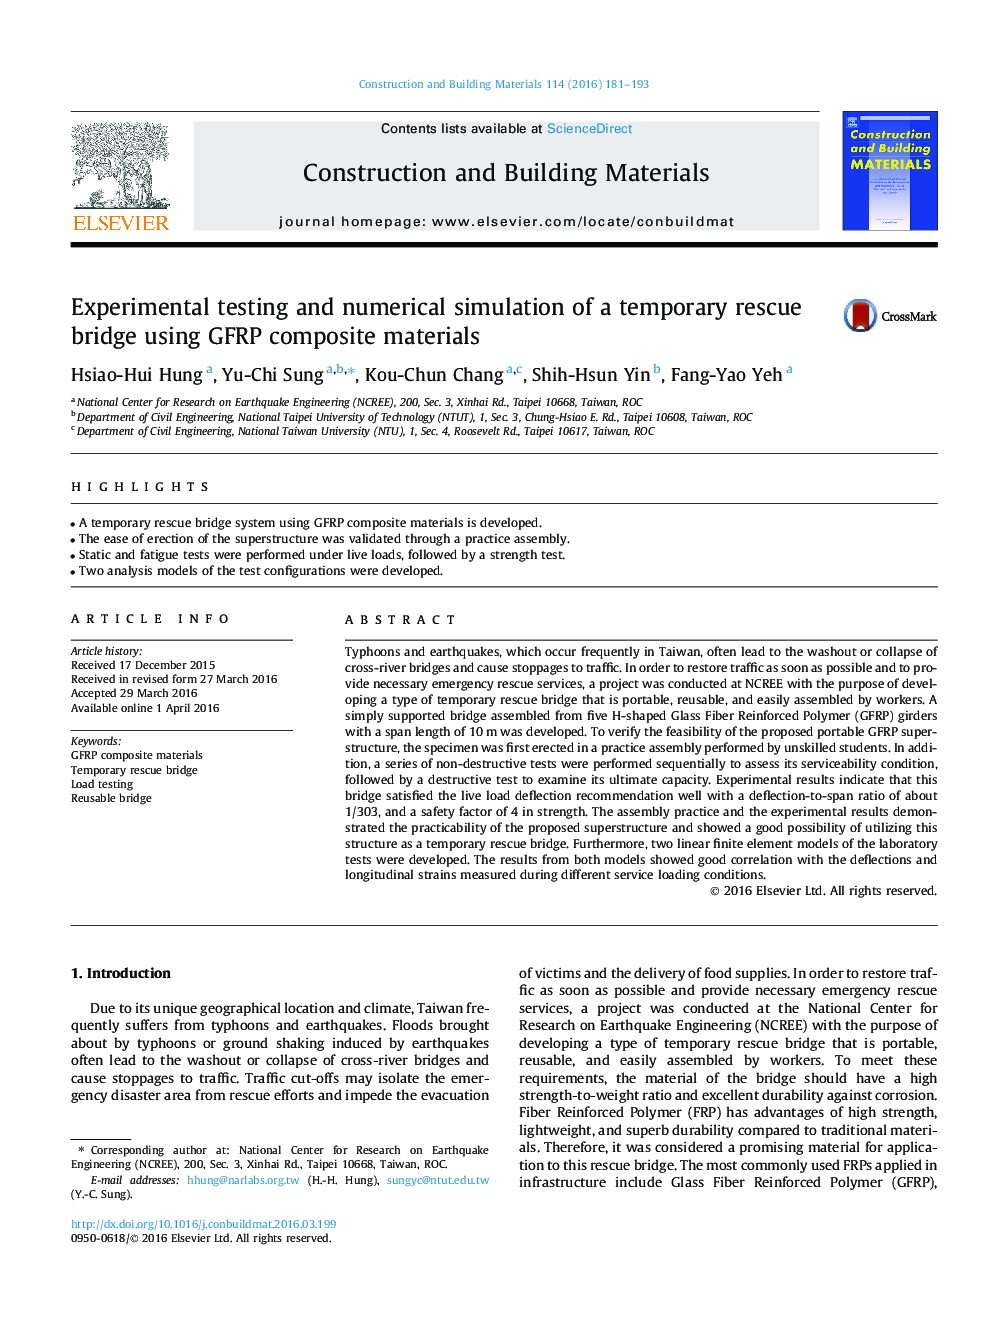 Experimental testing and numerical simulation of a temporary rescue bridge using GFRP composite materials